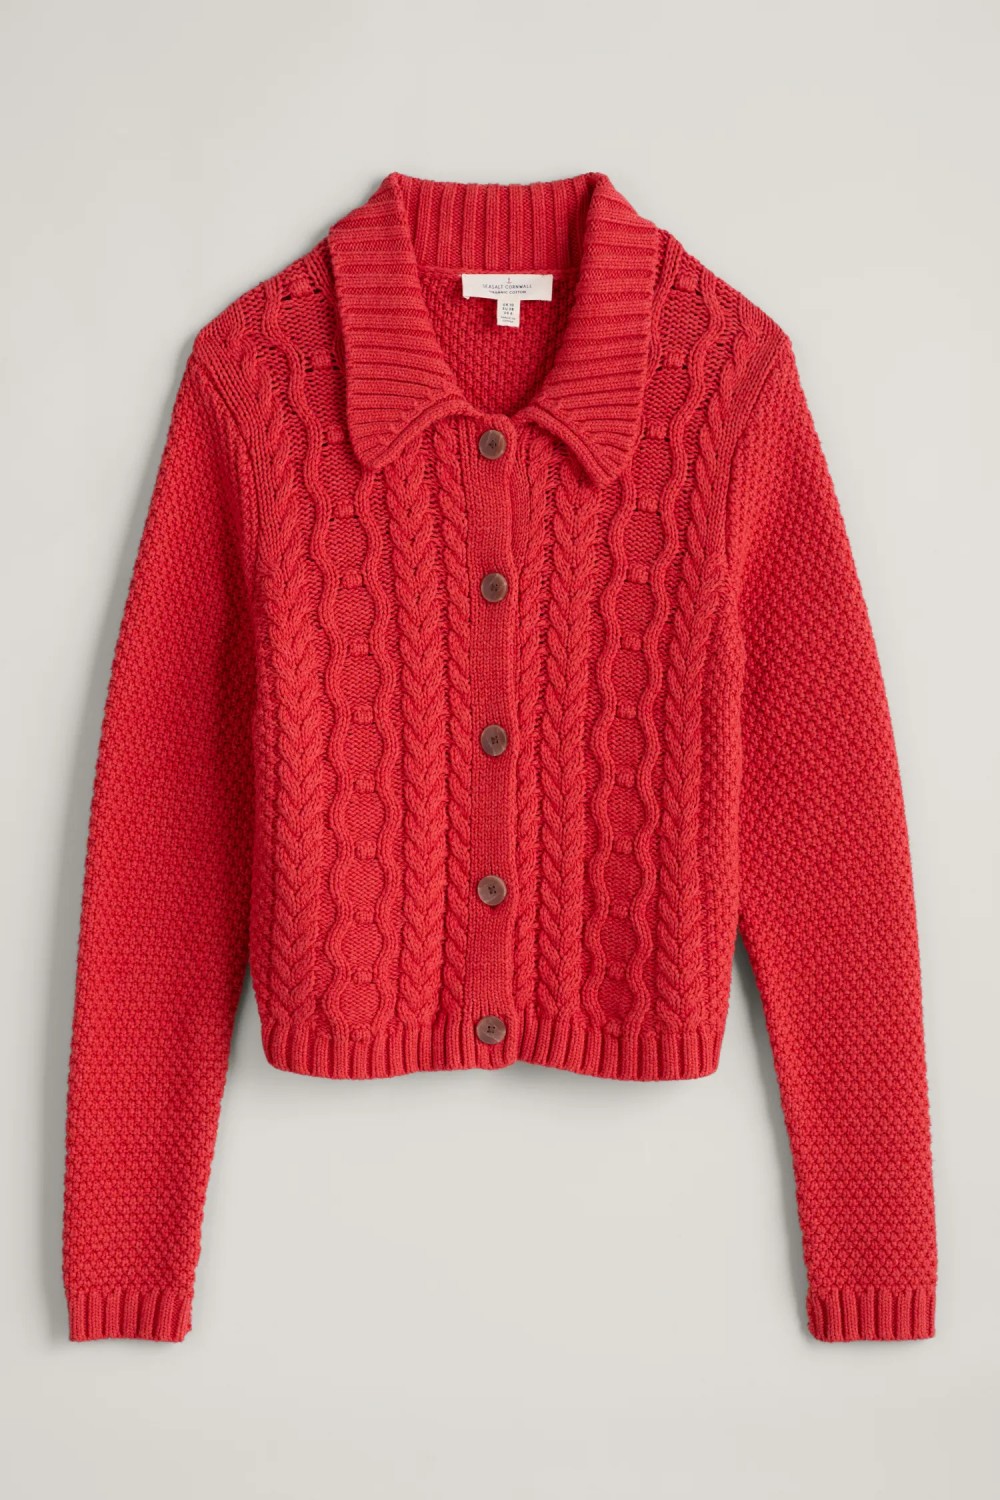 Seasalt Clothing Forest Ridge Cable Knit Collared Cardigan